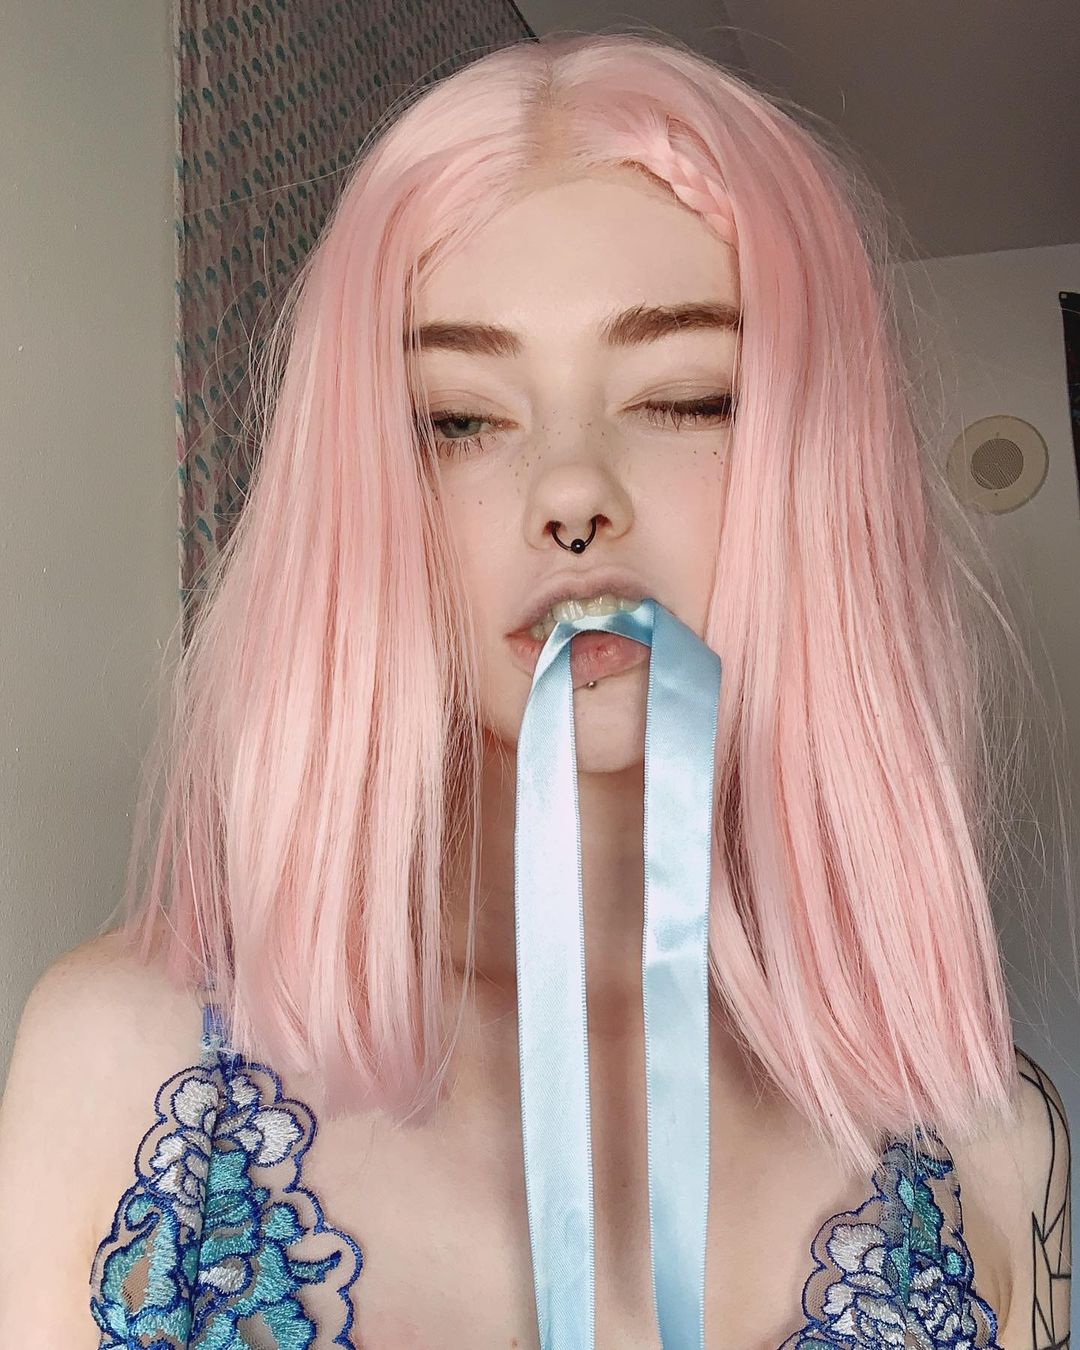 I Want To Tie This Pretty Bitch Up And Fuck Her Face So Hard Scrolller